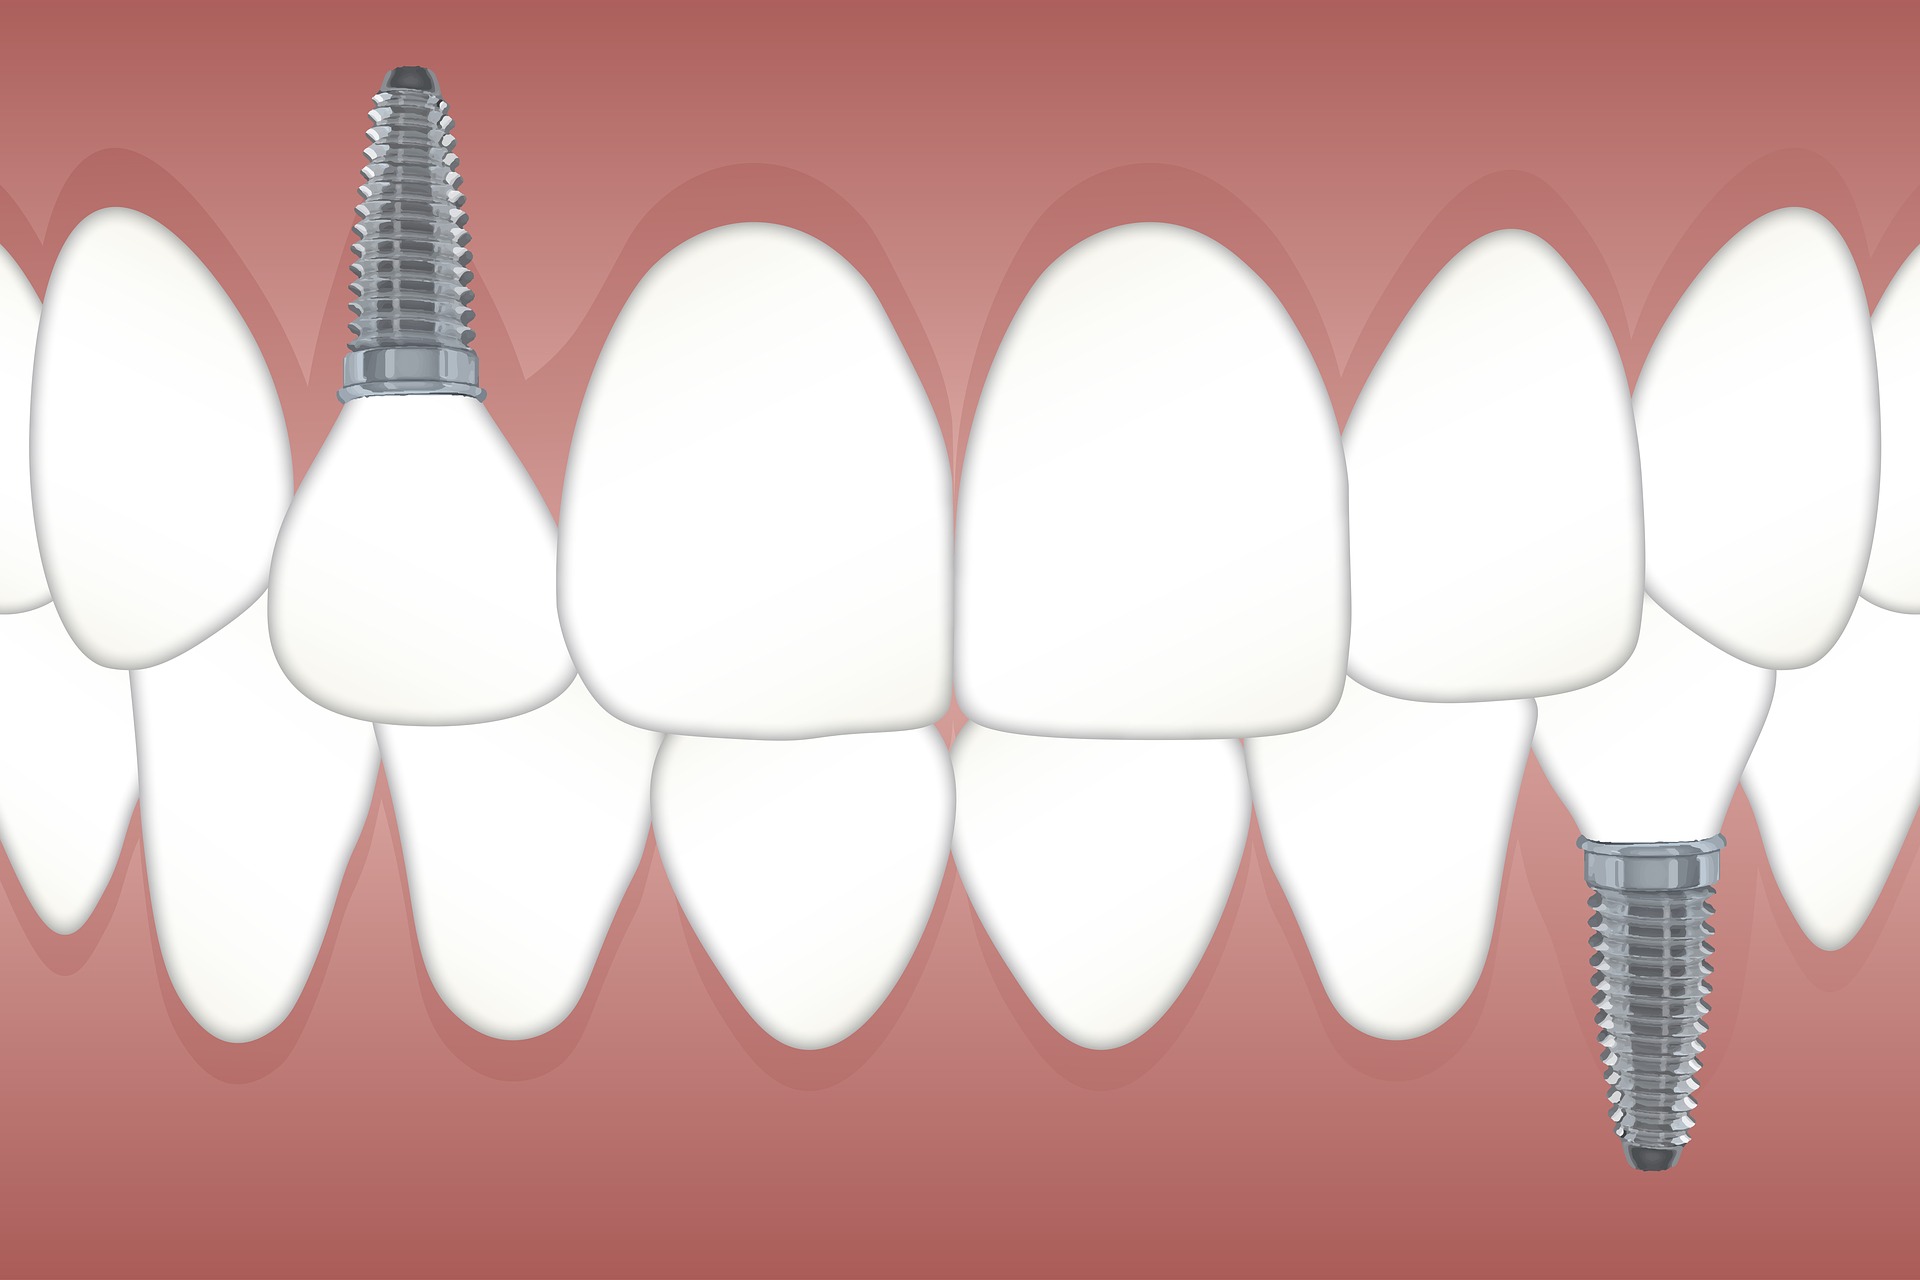 Tooth Extractions vs Dental Implants – What Is Best?